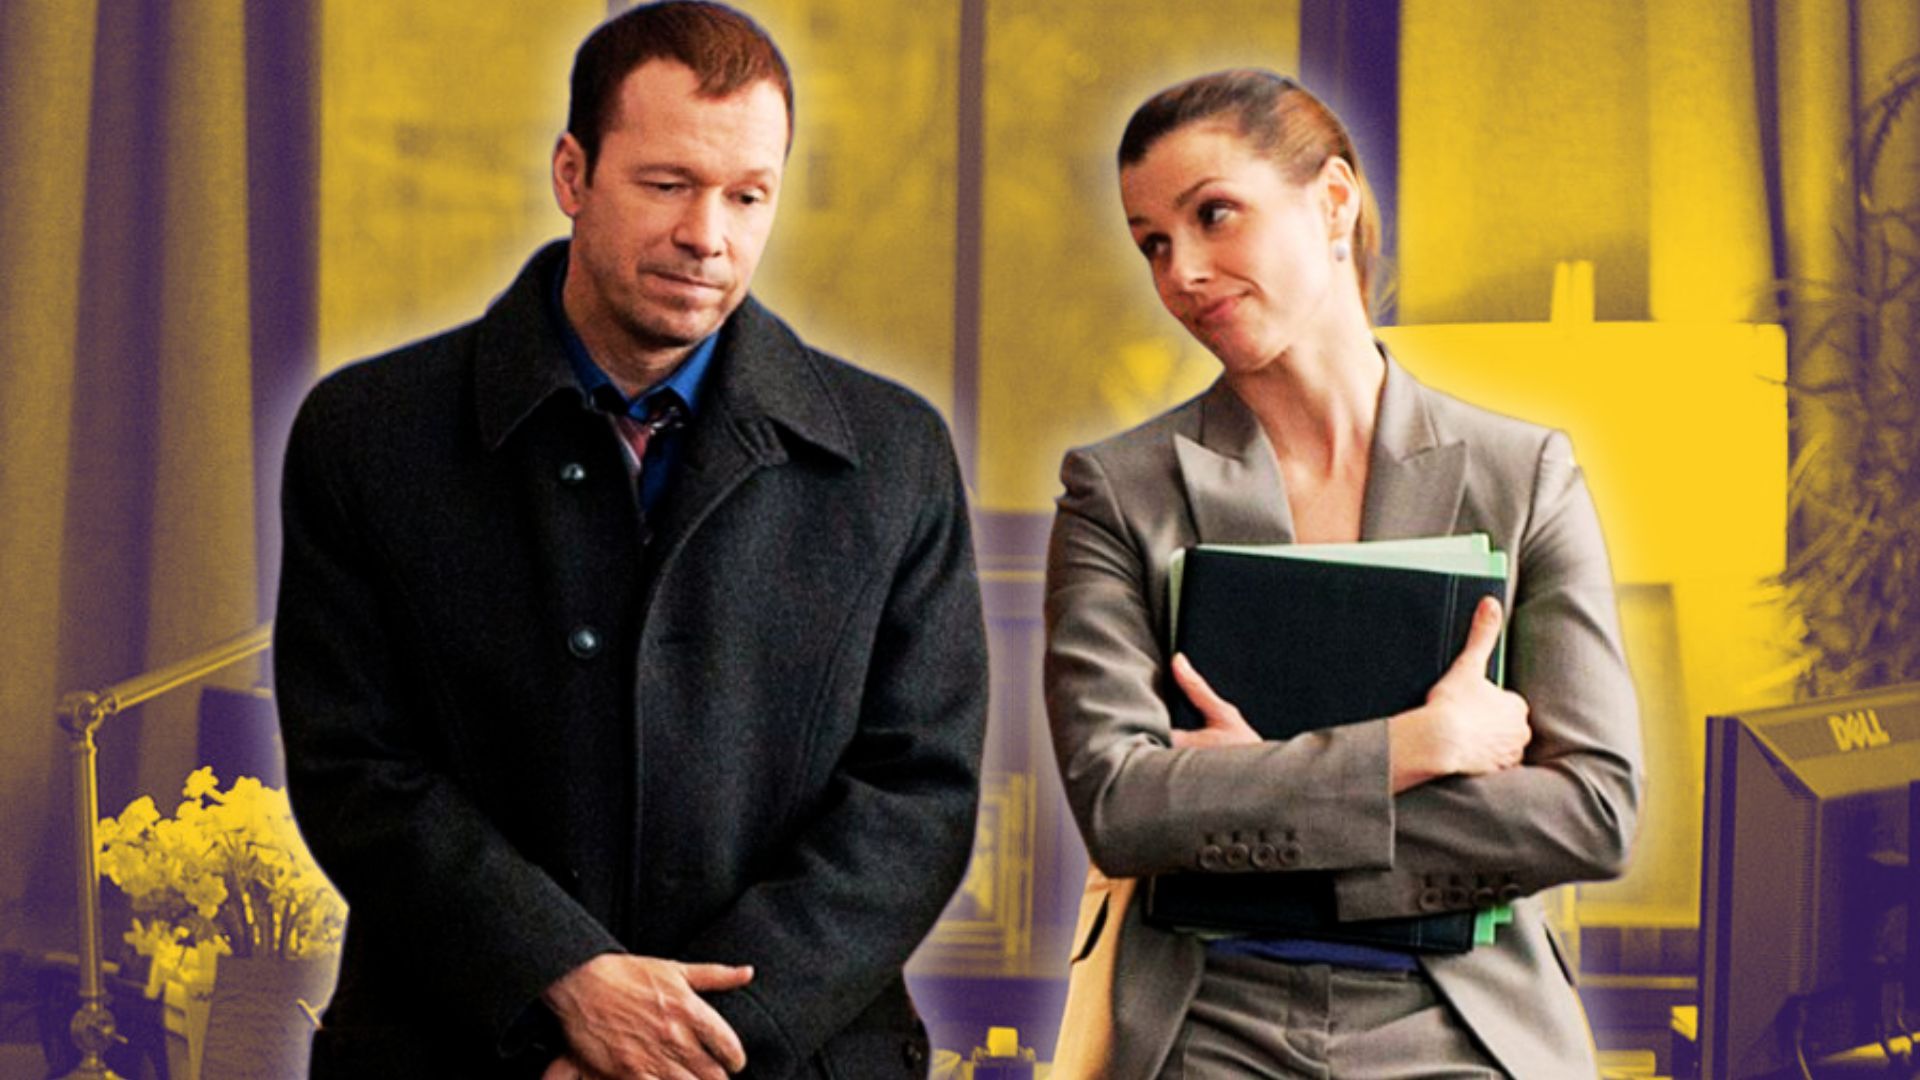 Blue Bloods’ Donnie Wahlberg and Bridget Moynahan Share Heartfelt Emotions as the Series Ends